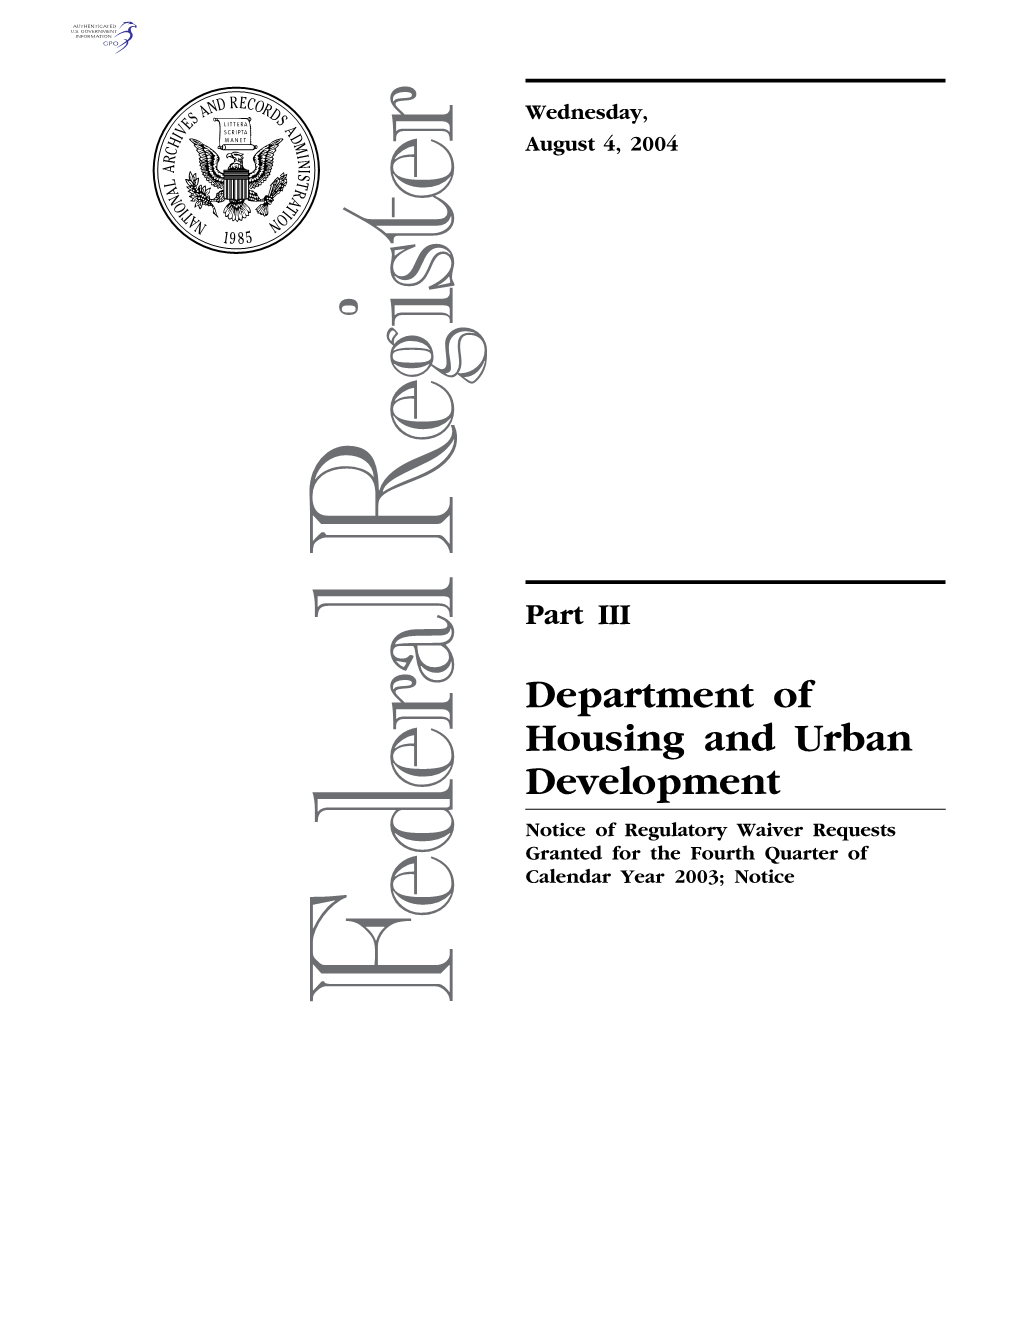 Department of Housing and Urban Development Notice of Regulatory Waiver Requests Granted for the Fourth Quarter of Calendar Year 2003; Notice